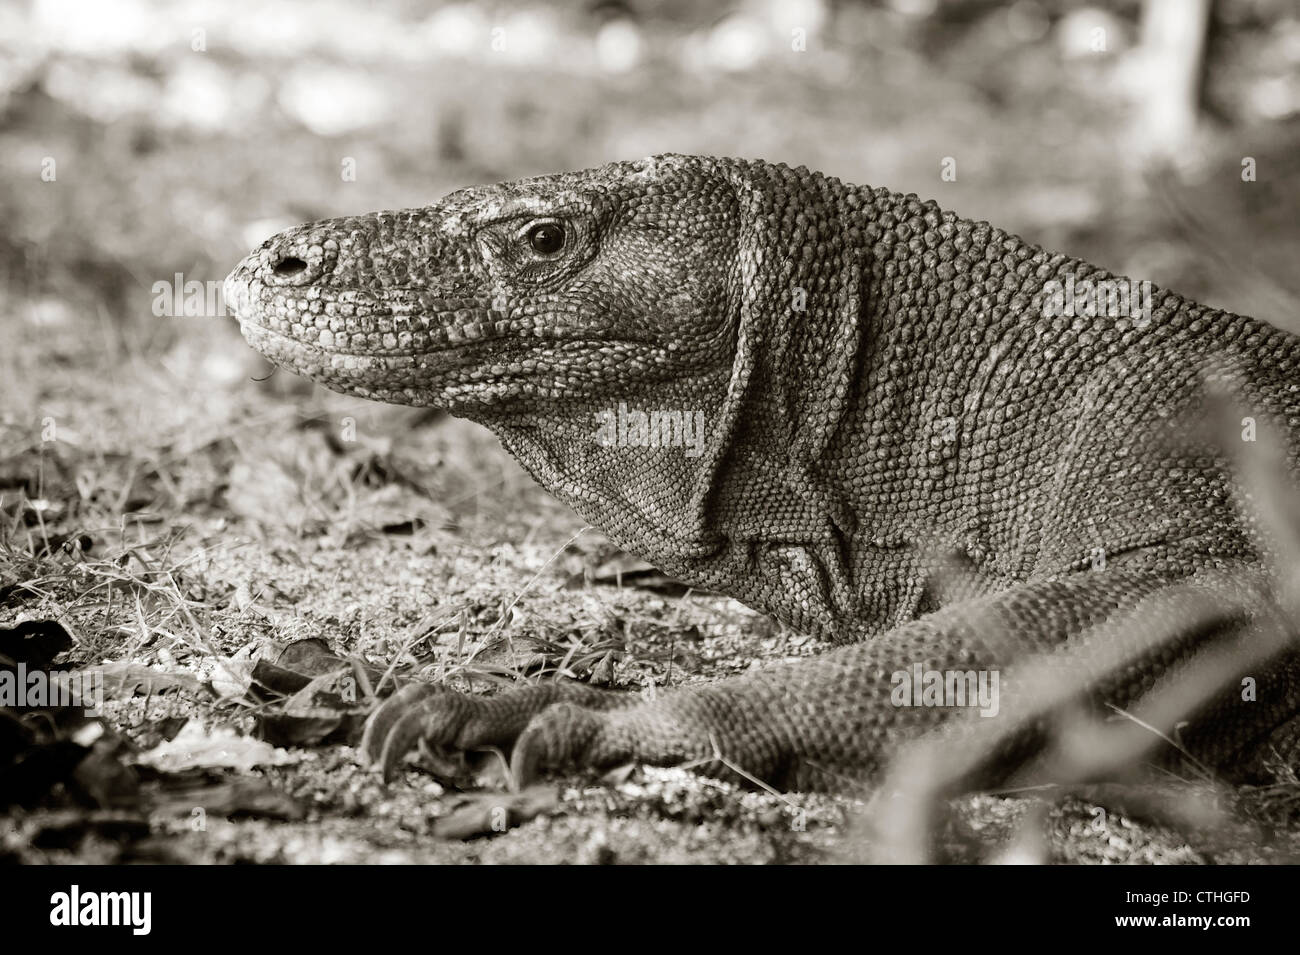 The Komodo dragon also known as the Komodo monitor, is a large species of lizard found in the Indonesian Island of Komodo. Stock Photo